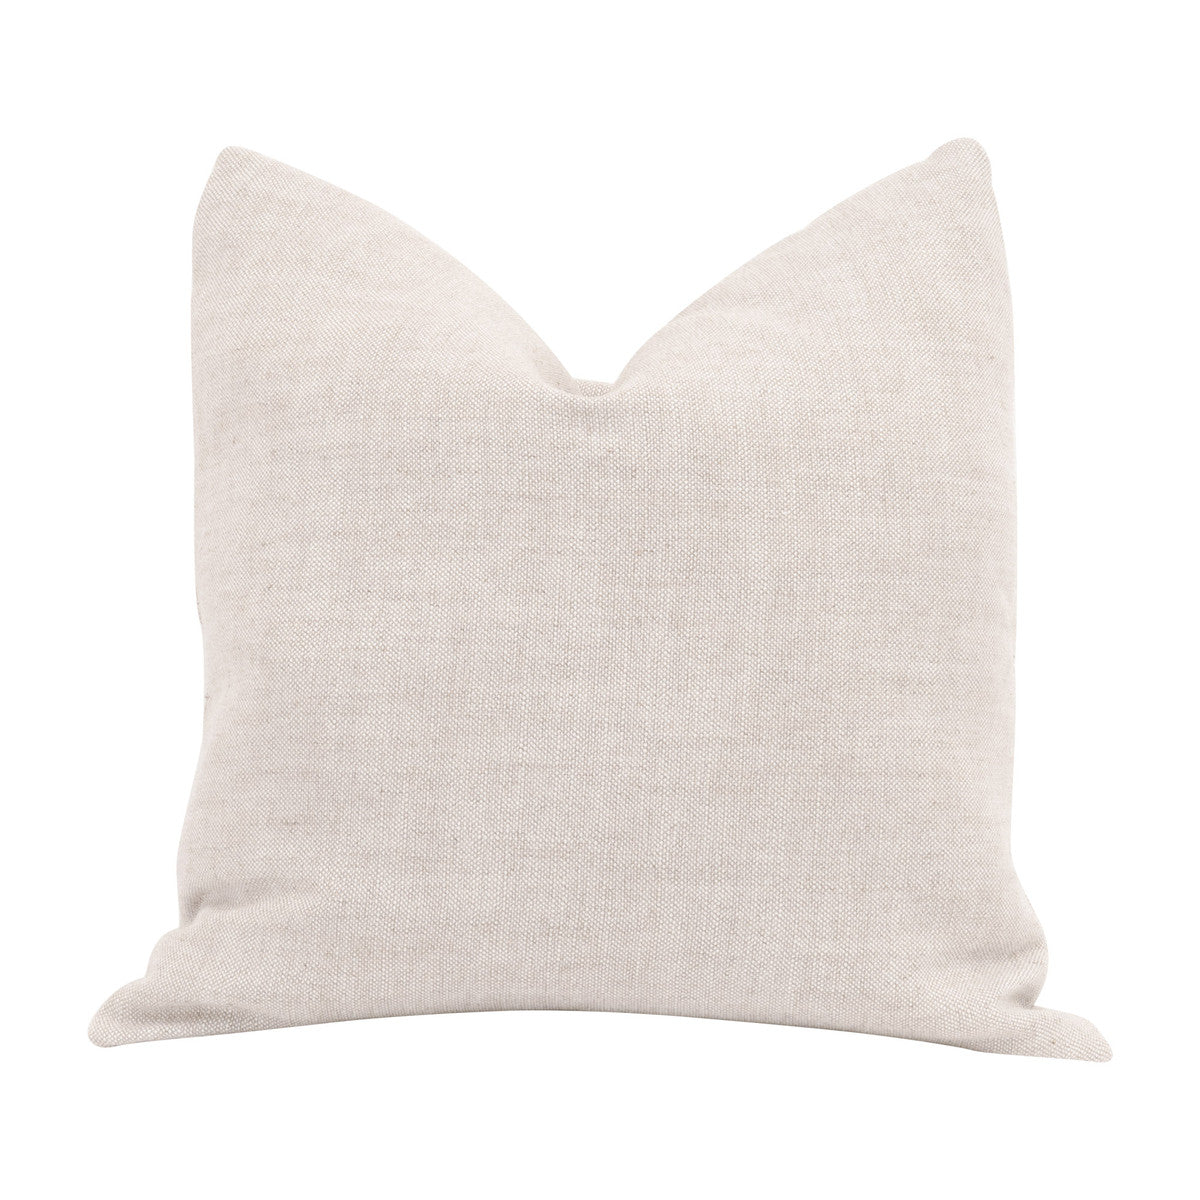 The Basic 22" Bisque Essential Pillow